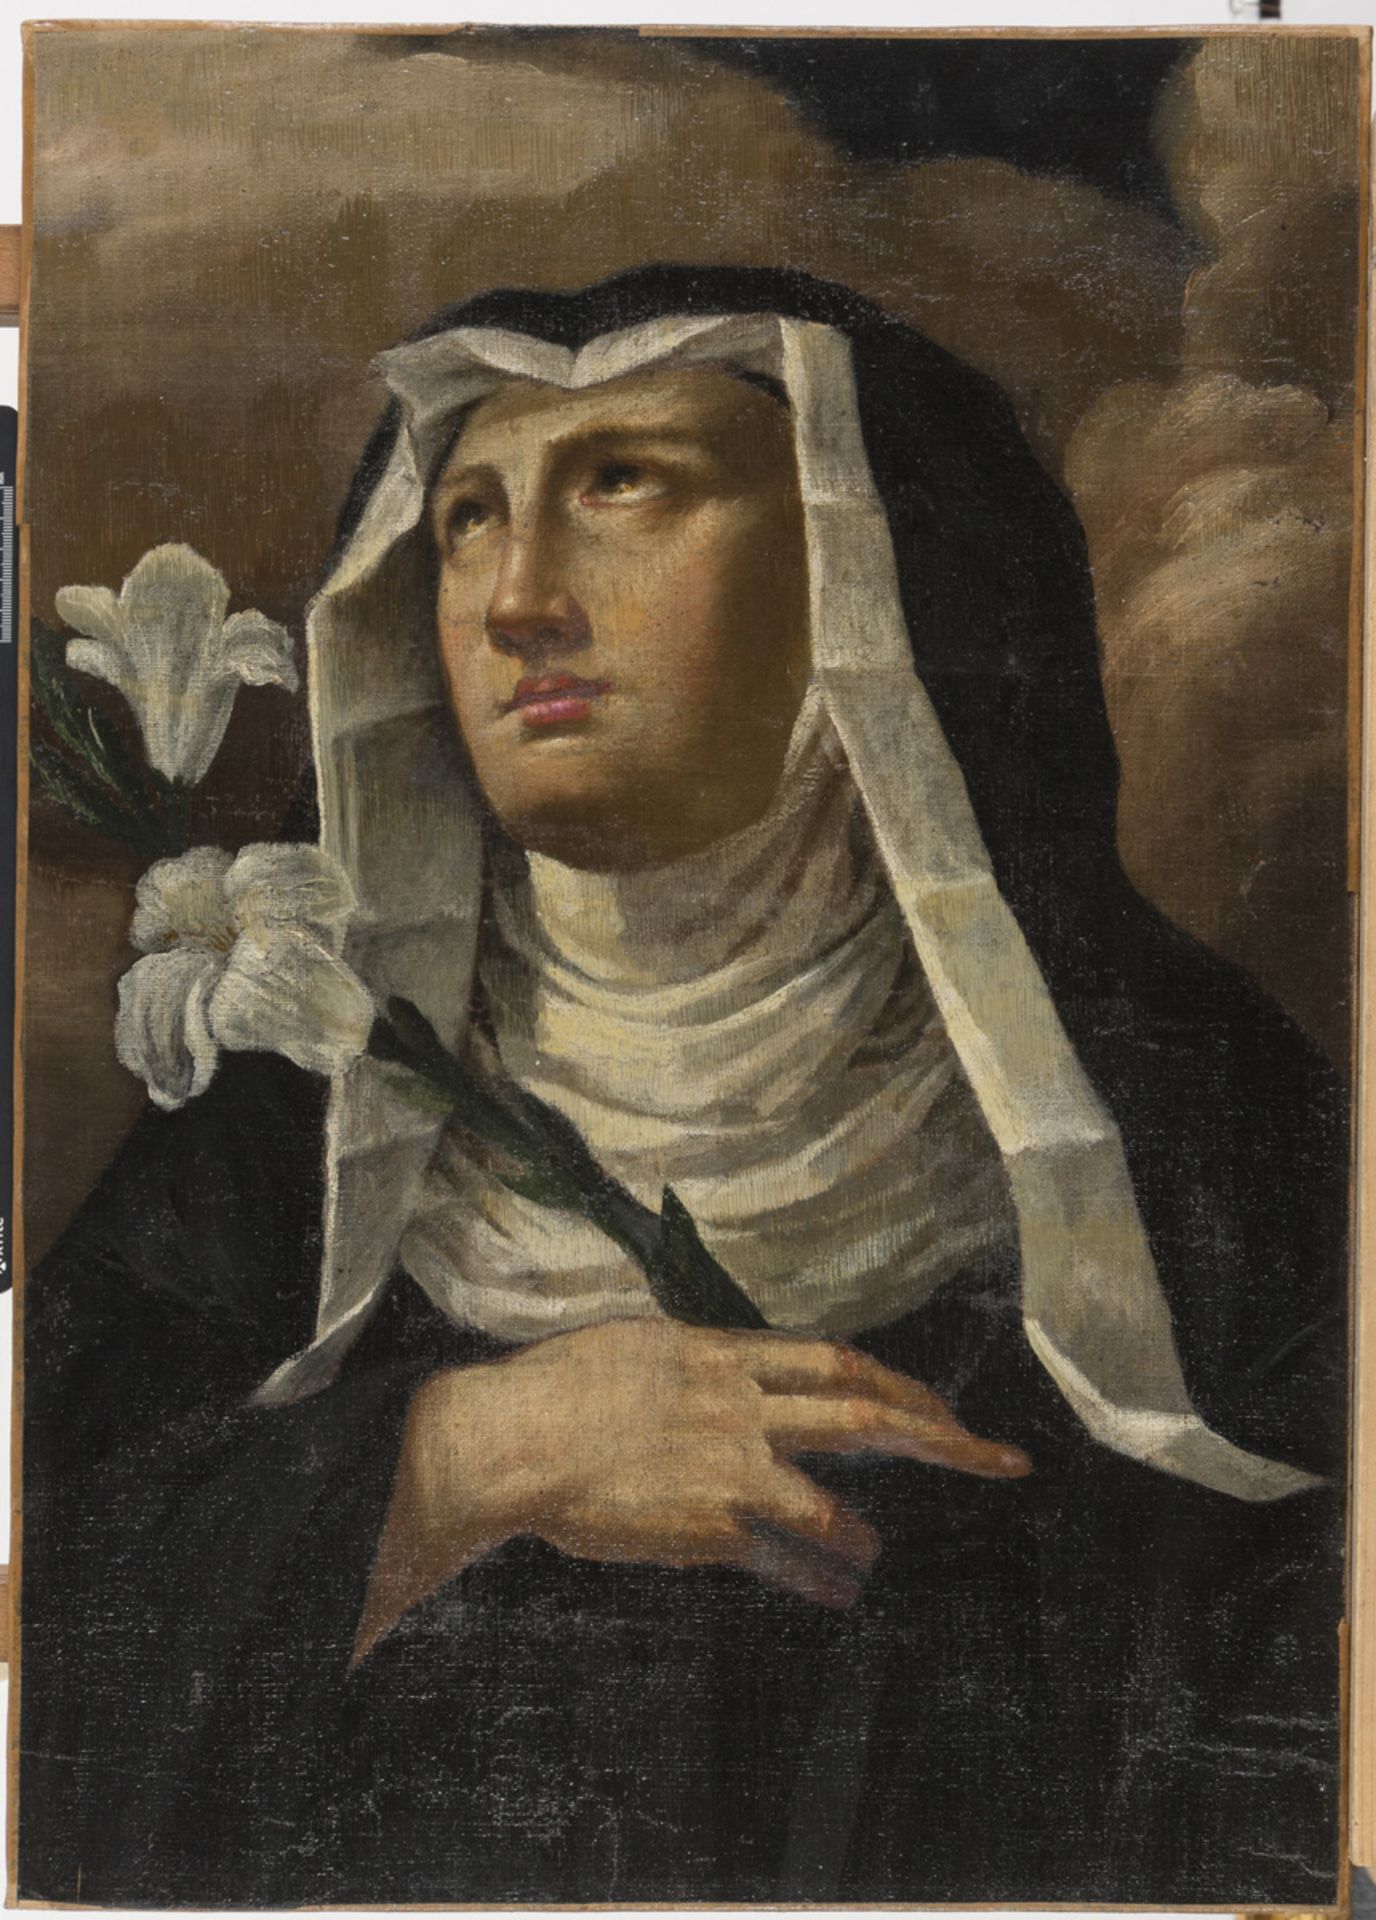 CENTRAL ITALIAN PAINTER, 17TH CENTURY Saint Chiara Oil on canvas, cm. 61 x 43,5 Conditions of the